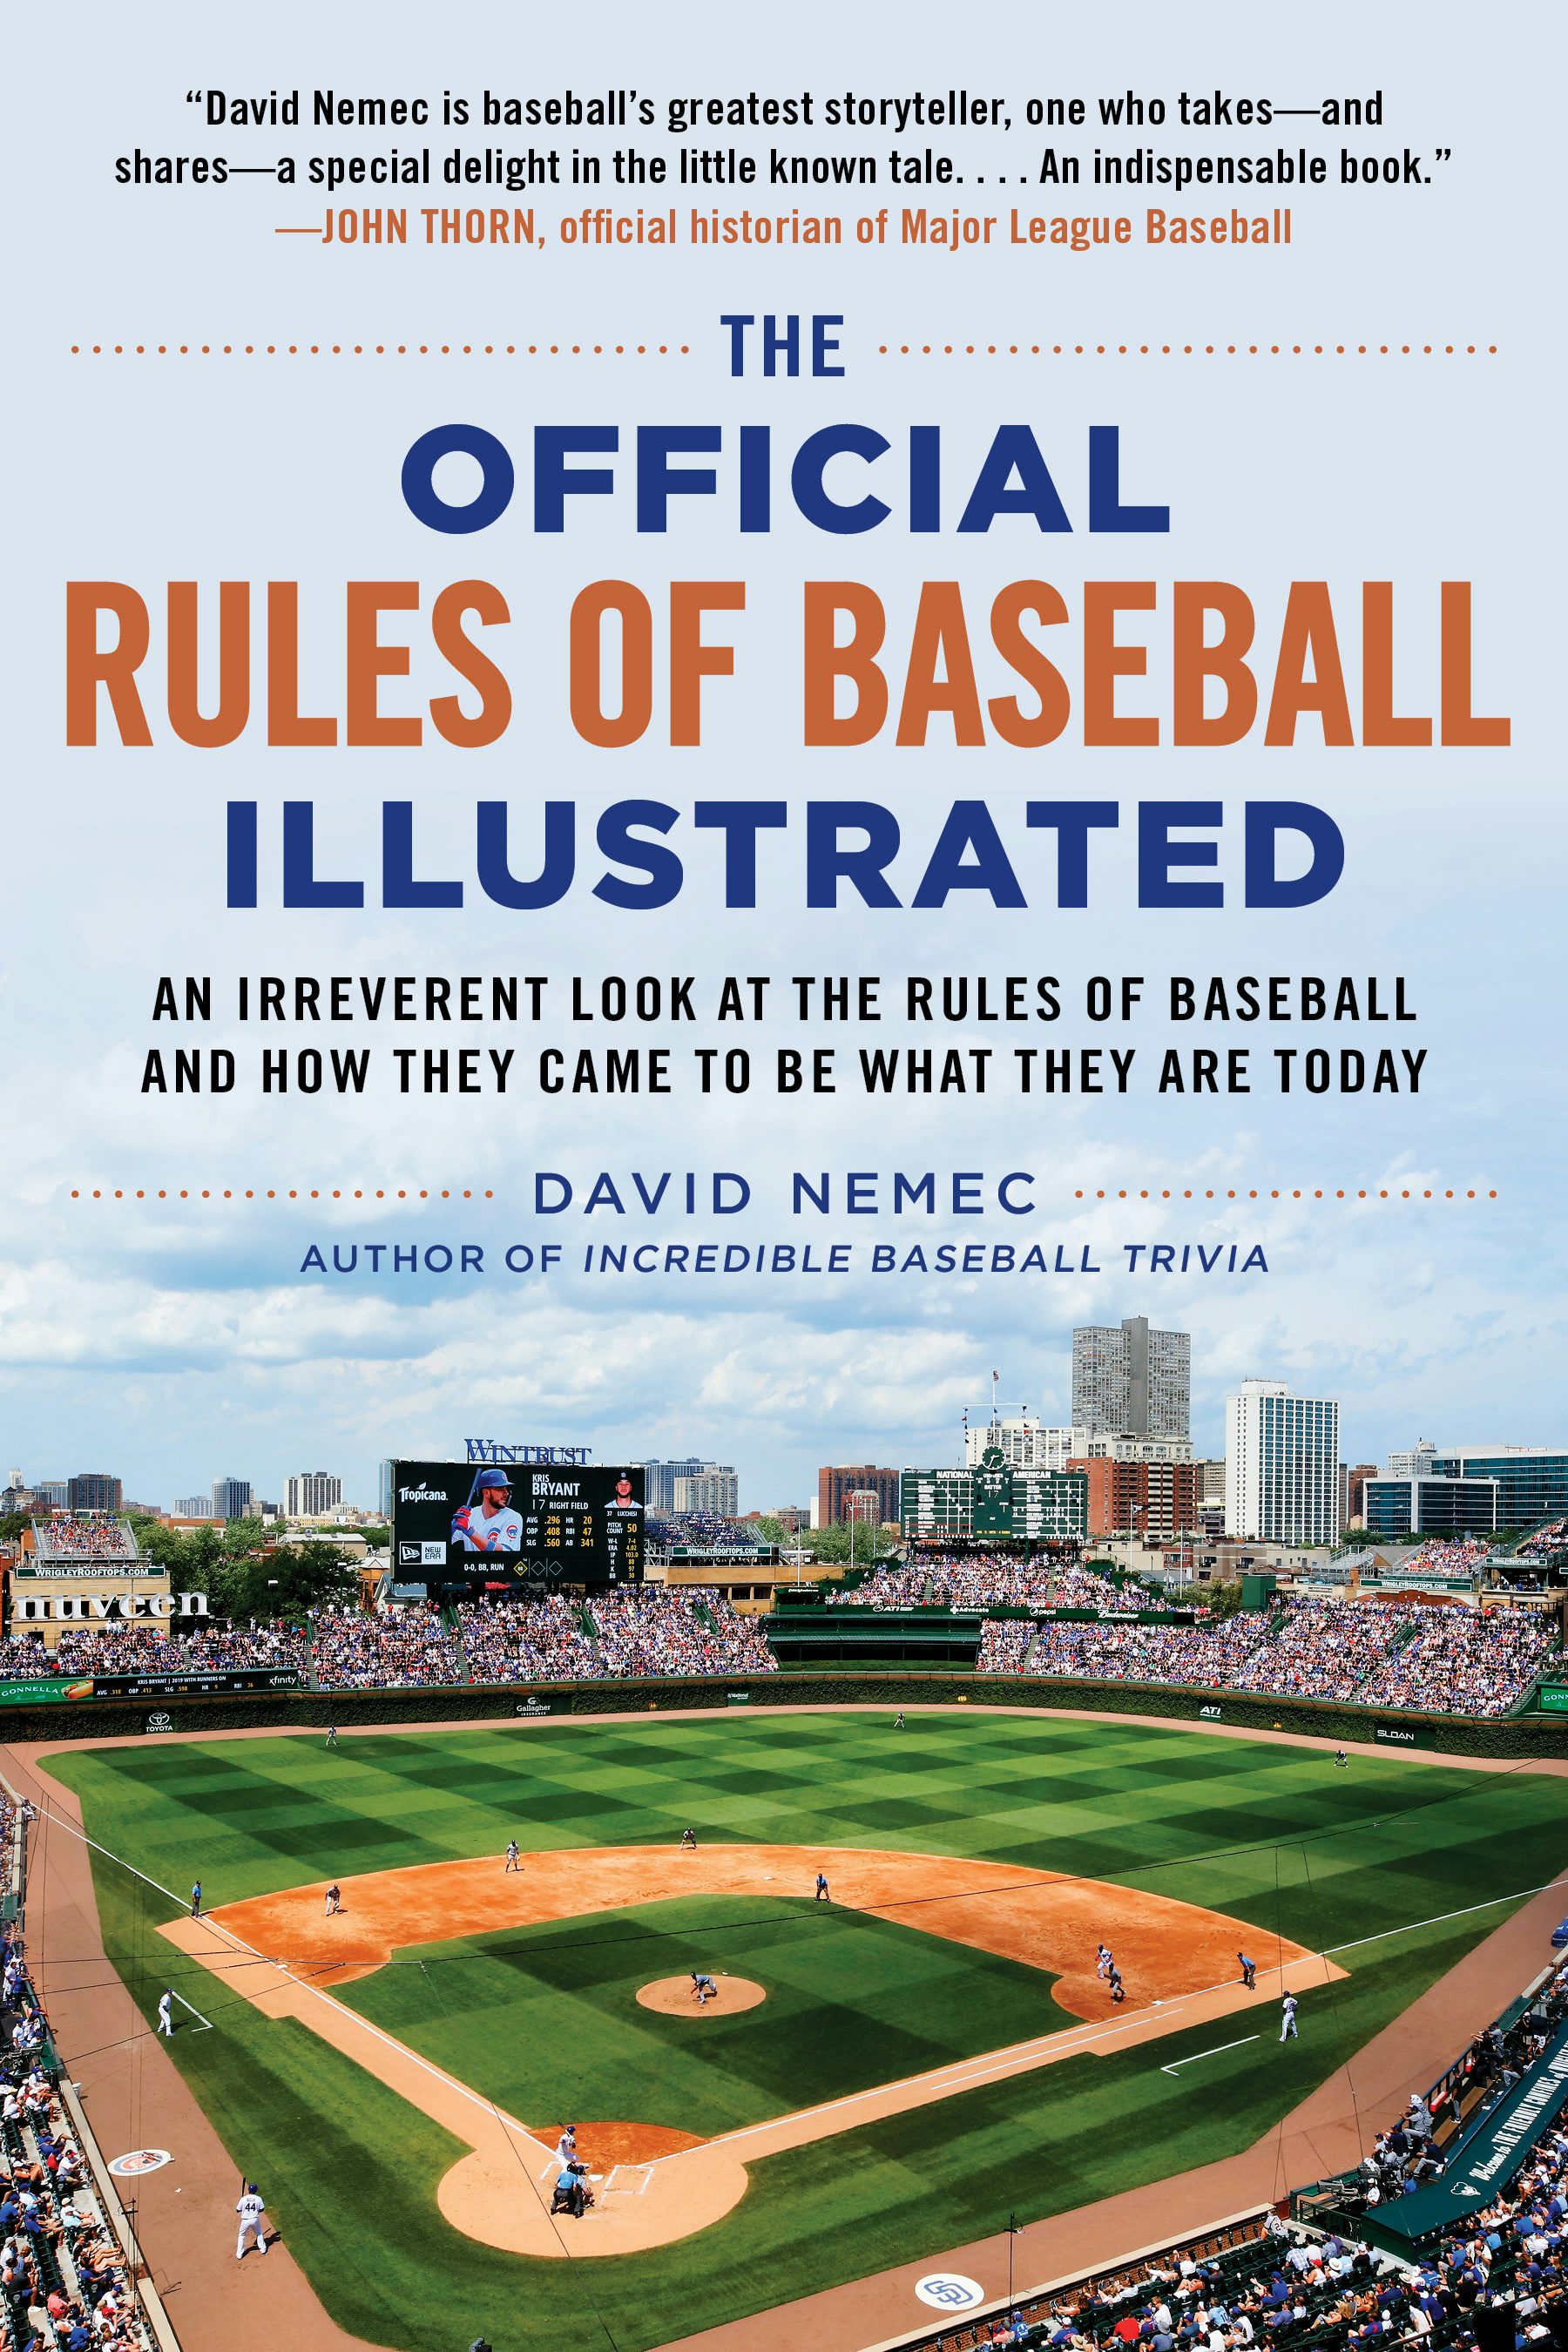 Inspired Products Group LLC 2020 Official Rules of Major League Baseball  Book  Bayshore Shopping Centre